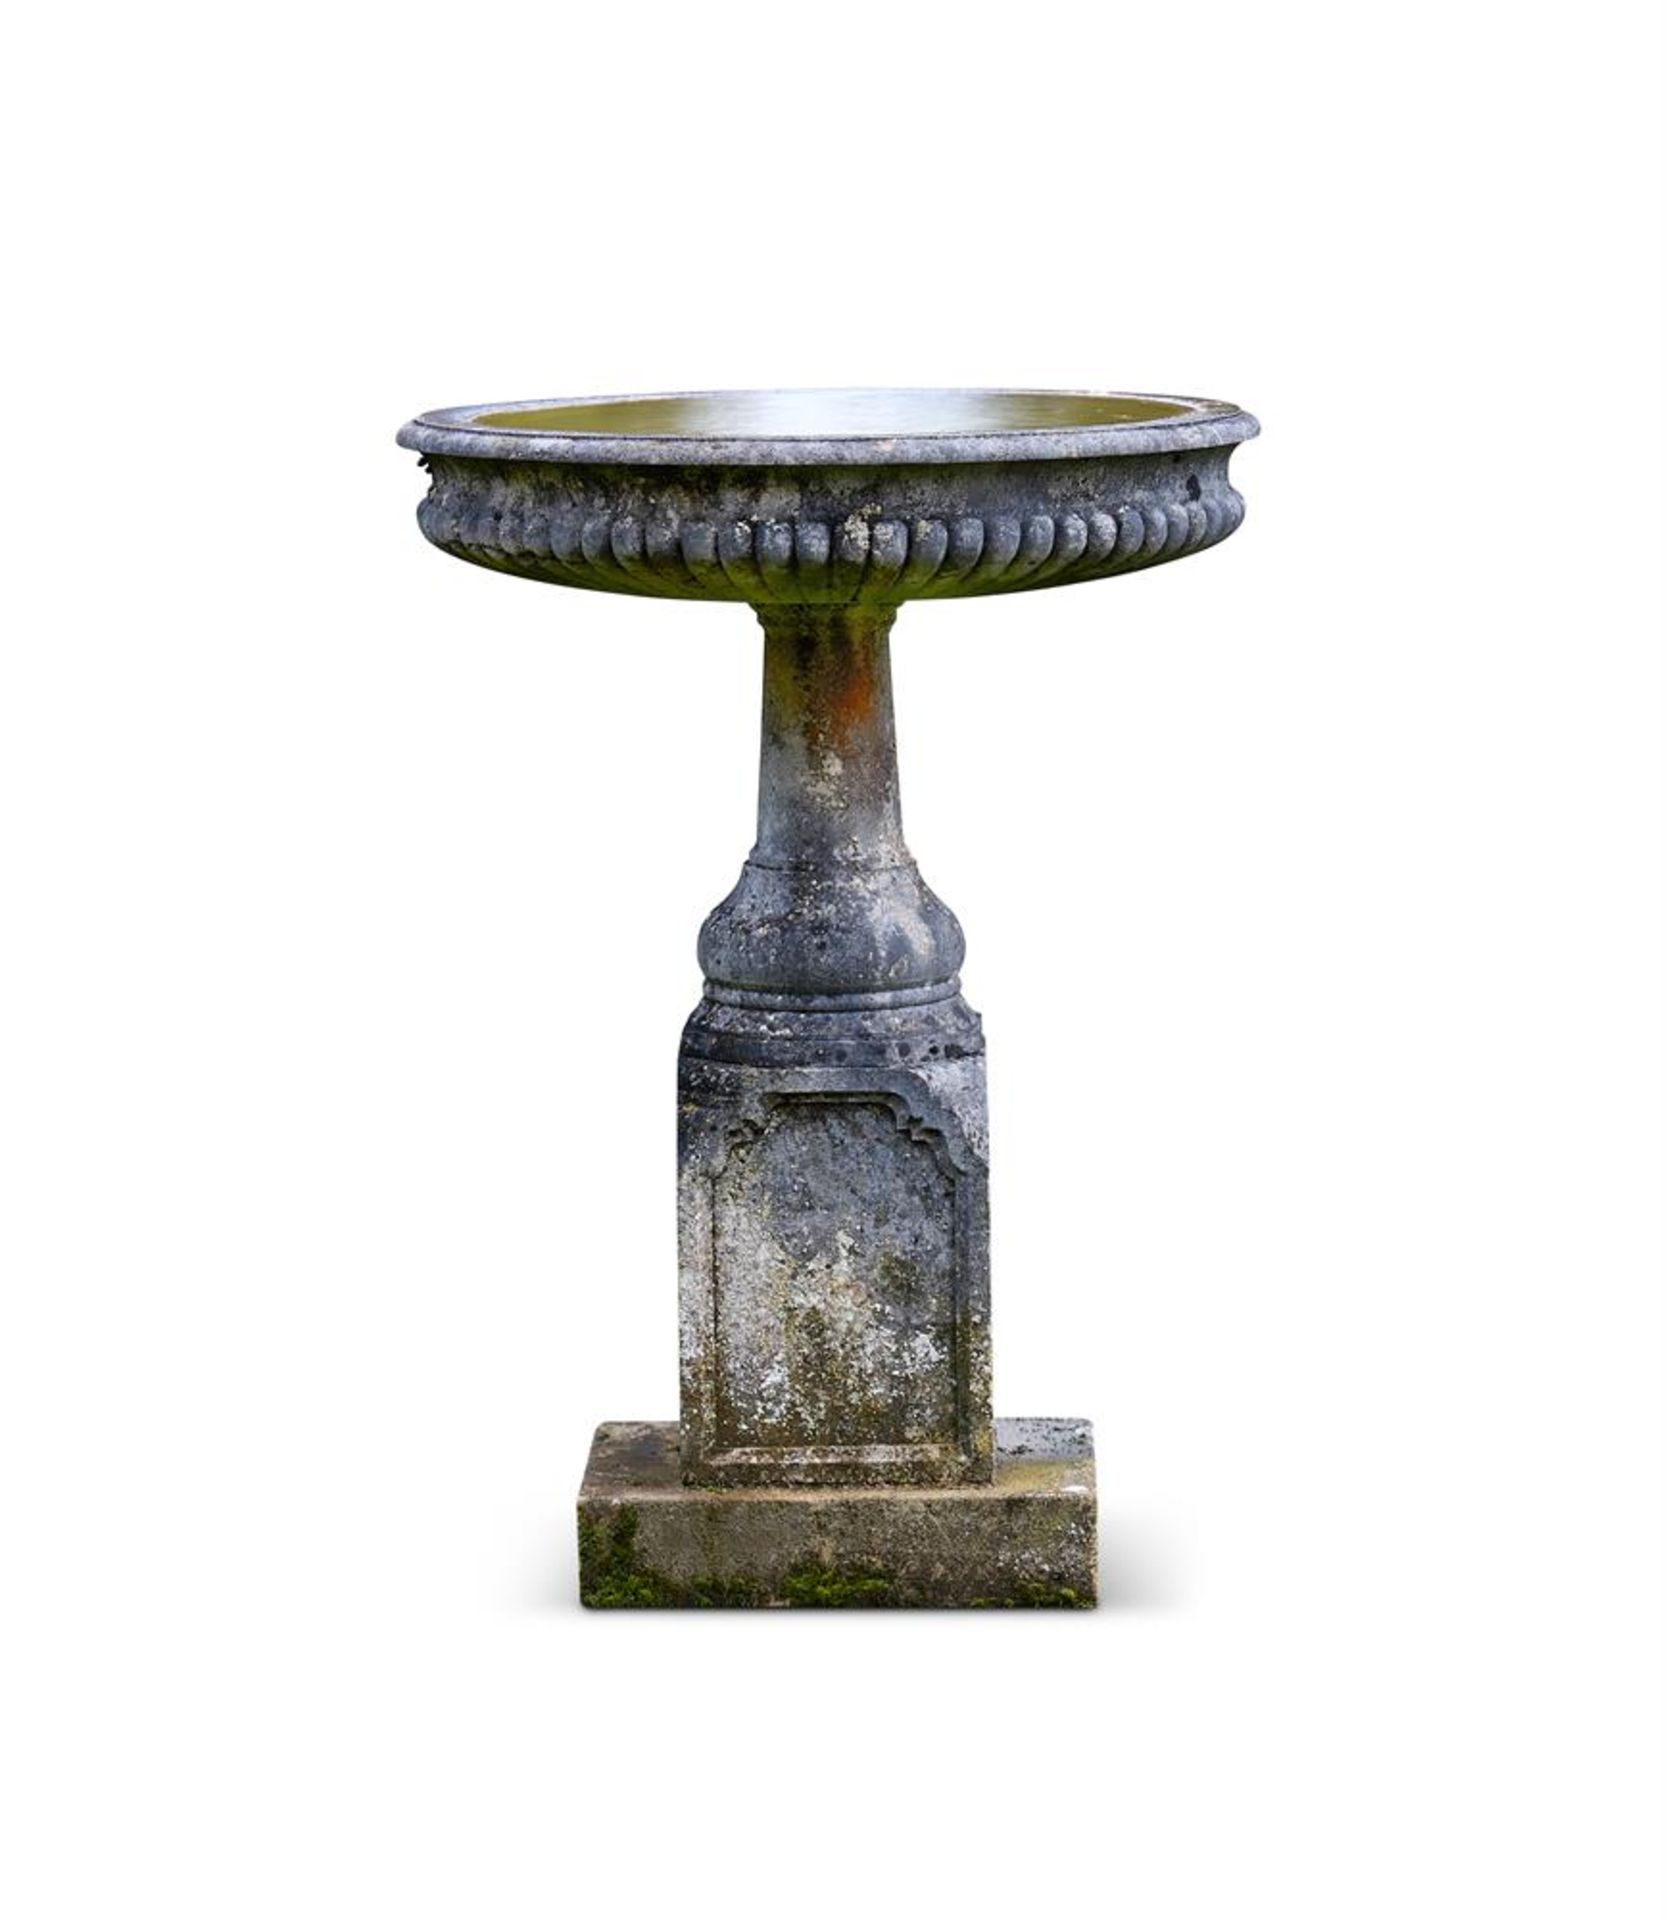 A LARGE RECONSTITUTED STONE BIRD BATH, EARLY 20TH CENTURY